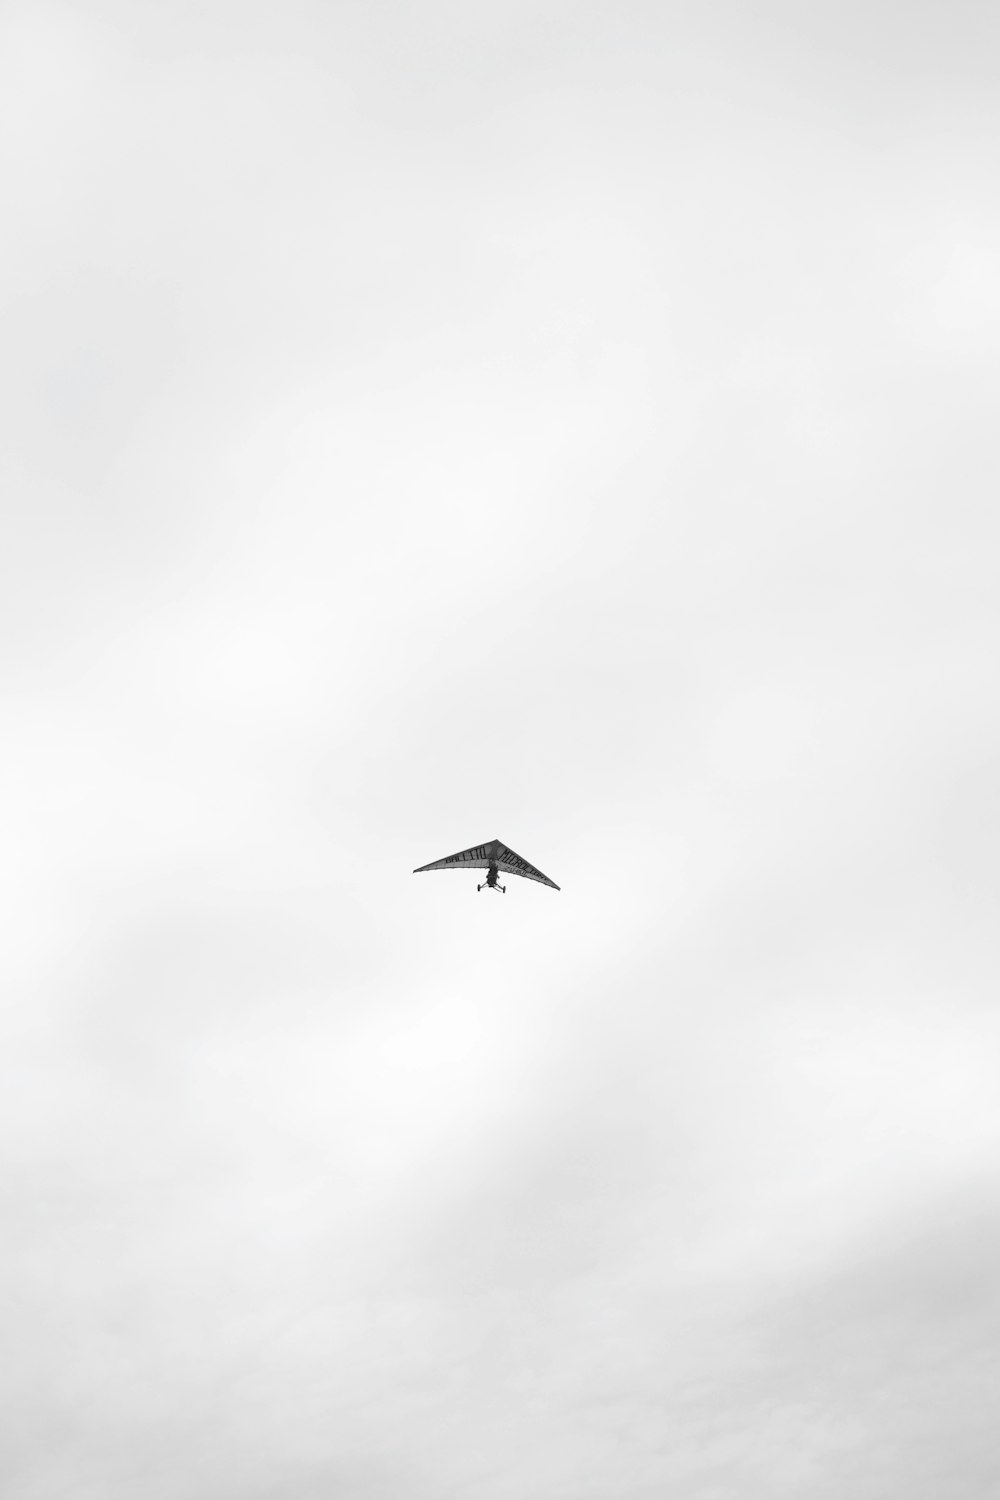 grayscale photography of plane